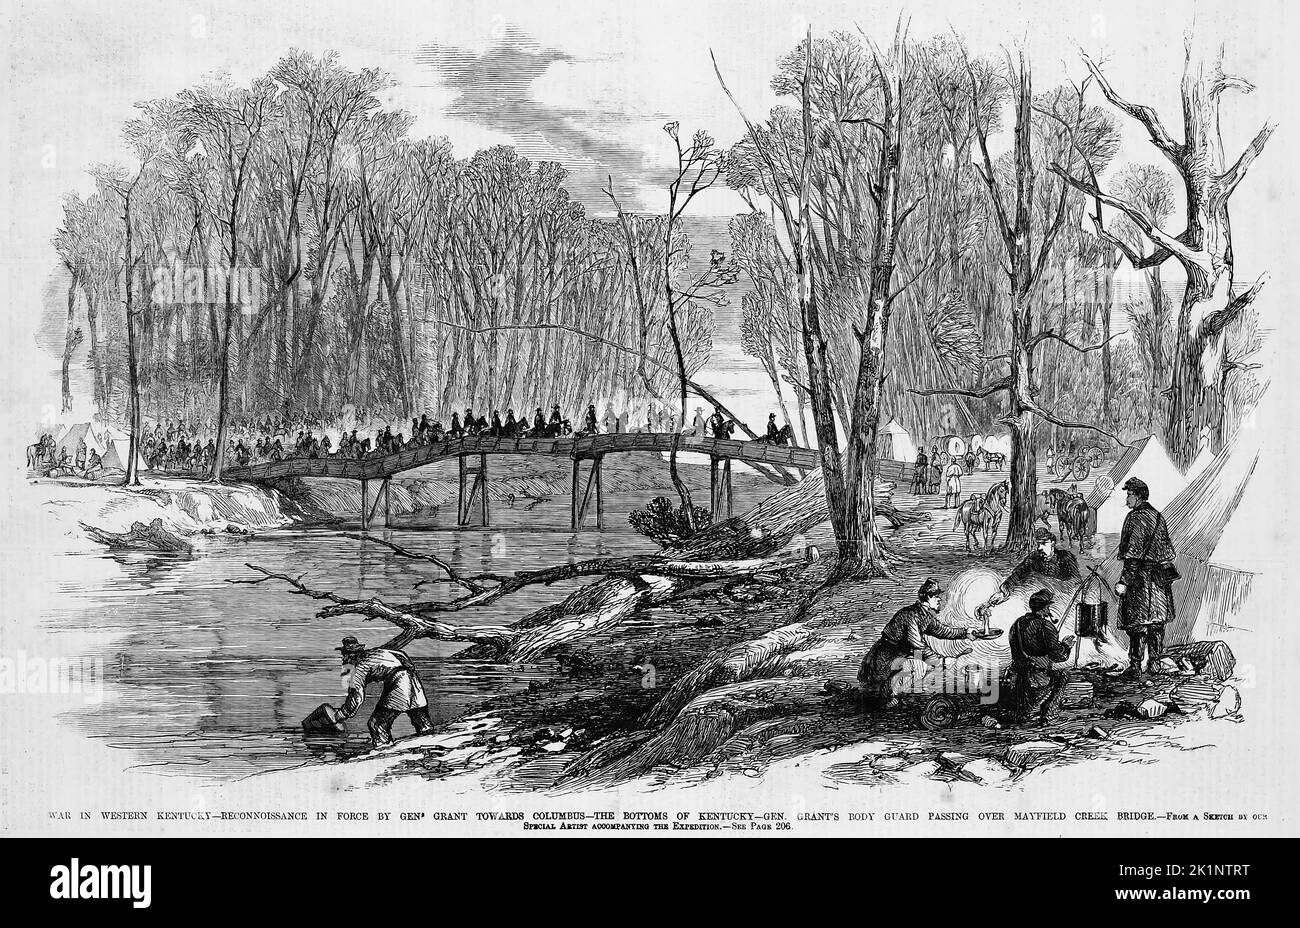 War in Western Kentucky - Reconnaissance in force by General Ulysses S. Grant towards Columbus - The bottoms of Kentucky - General Grant's bodyguard passing over Mayfield Creek Bridge. January 1862. 19th century American Civil War illustration from Frank Leslie's Illustrated Newspaper Stock Photo